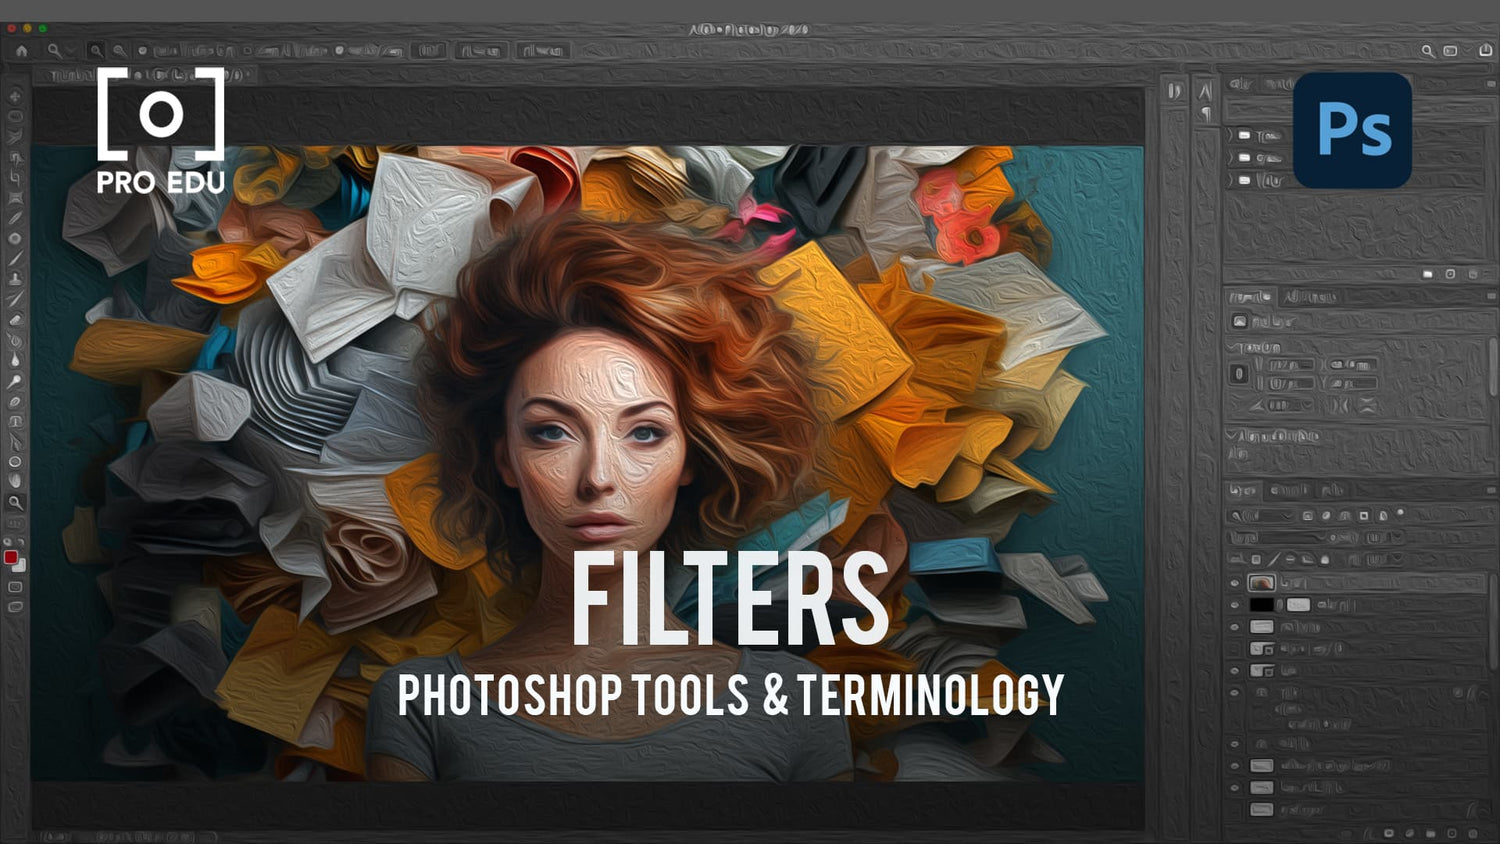 Filters and Effects in Photoshop - PRO EDU Tutorial